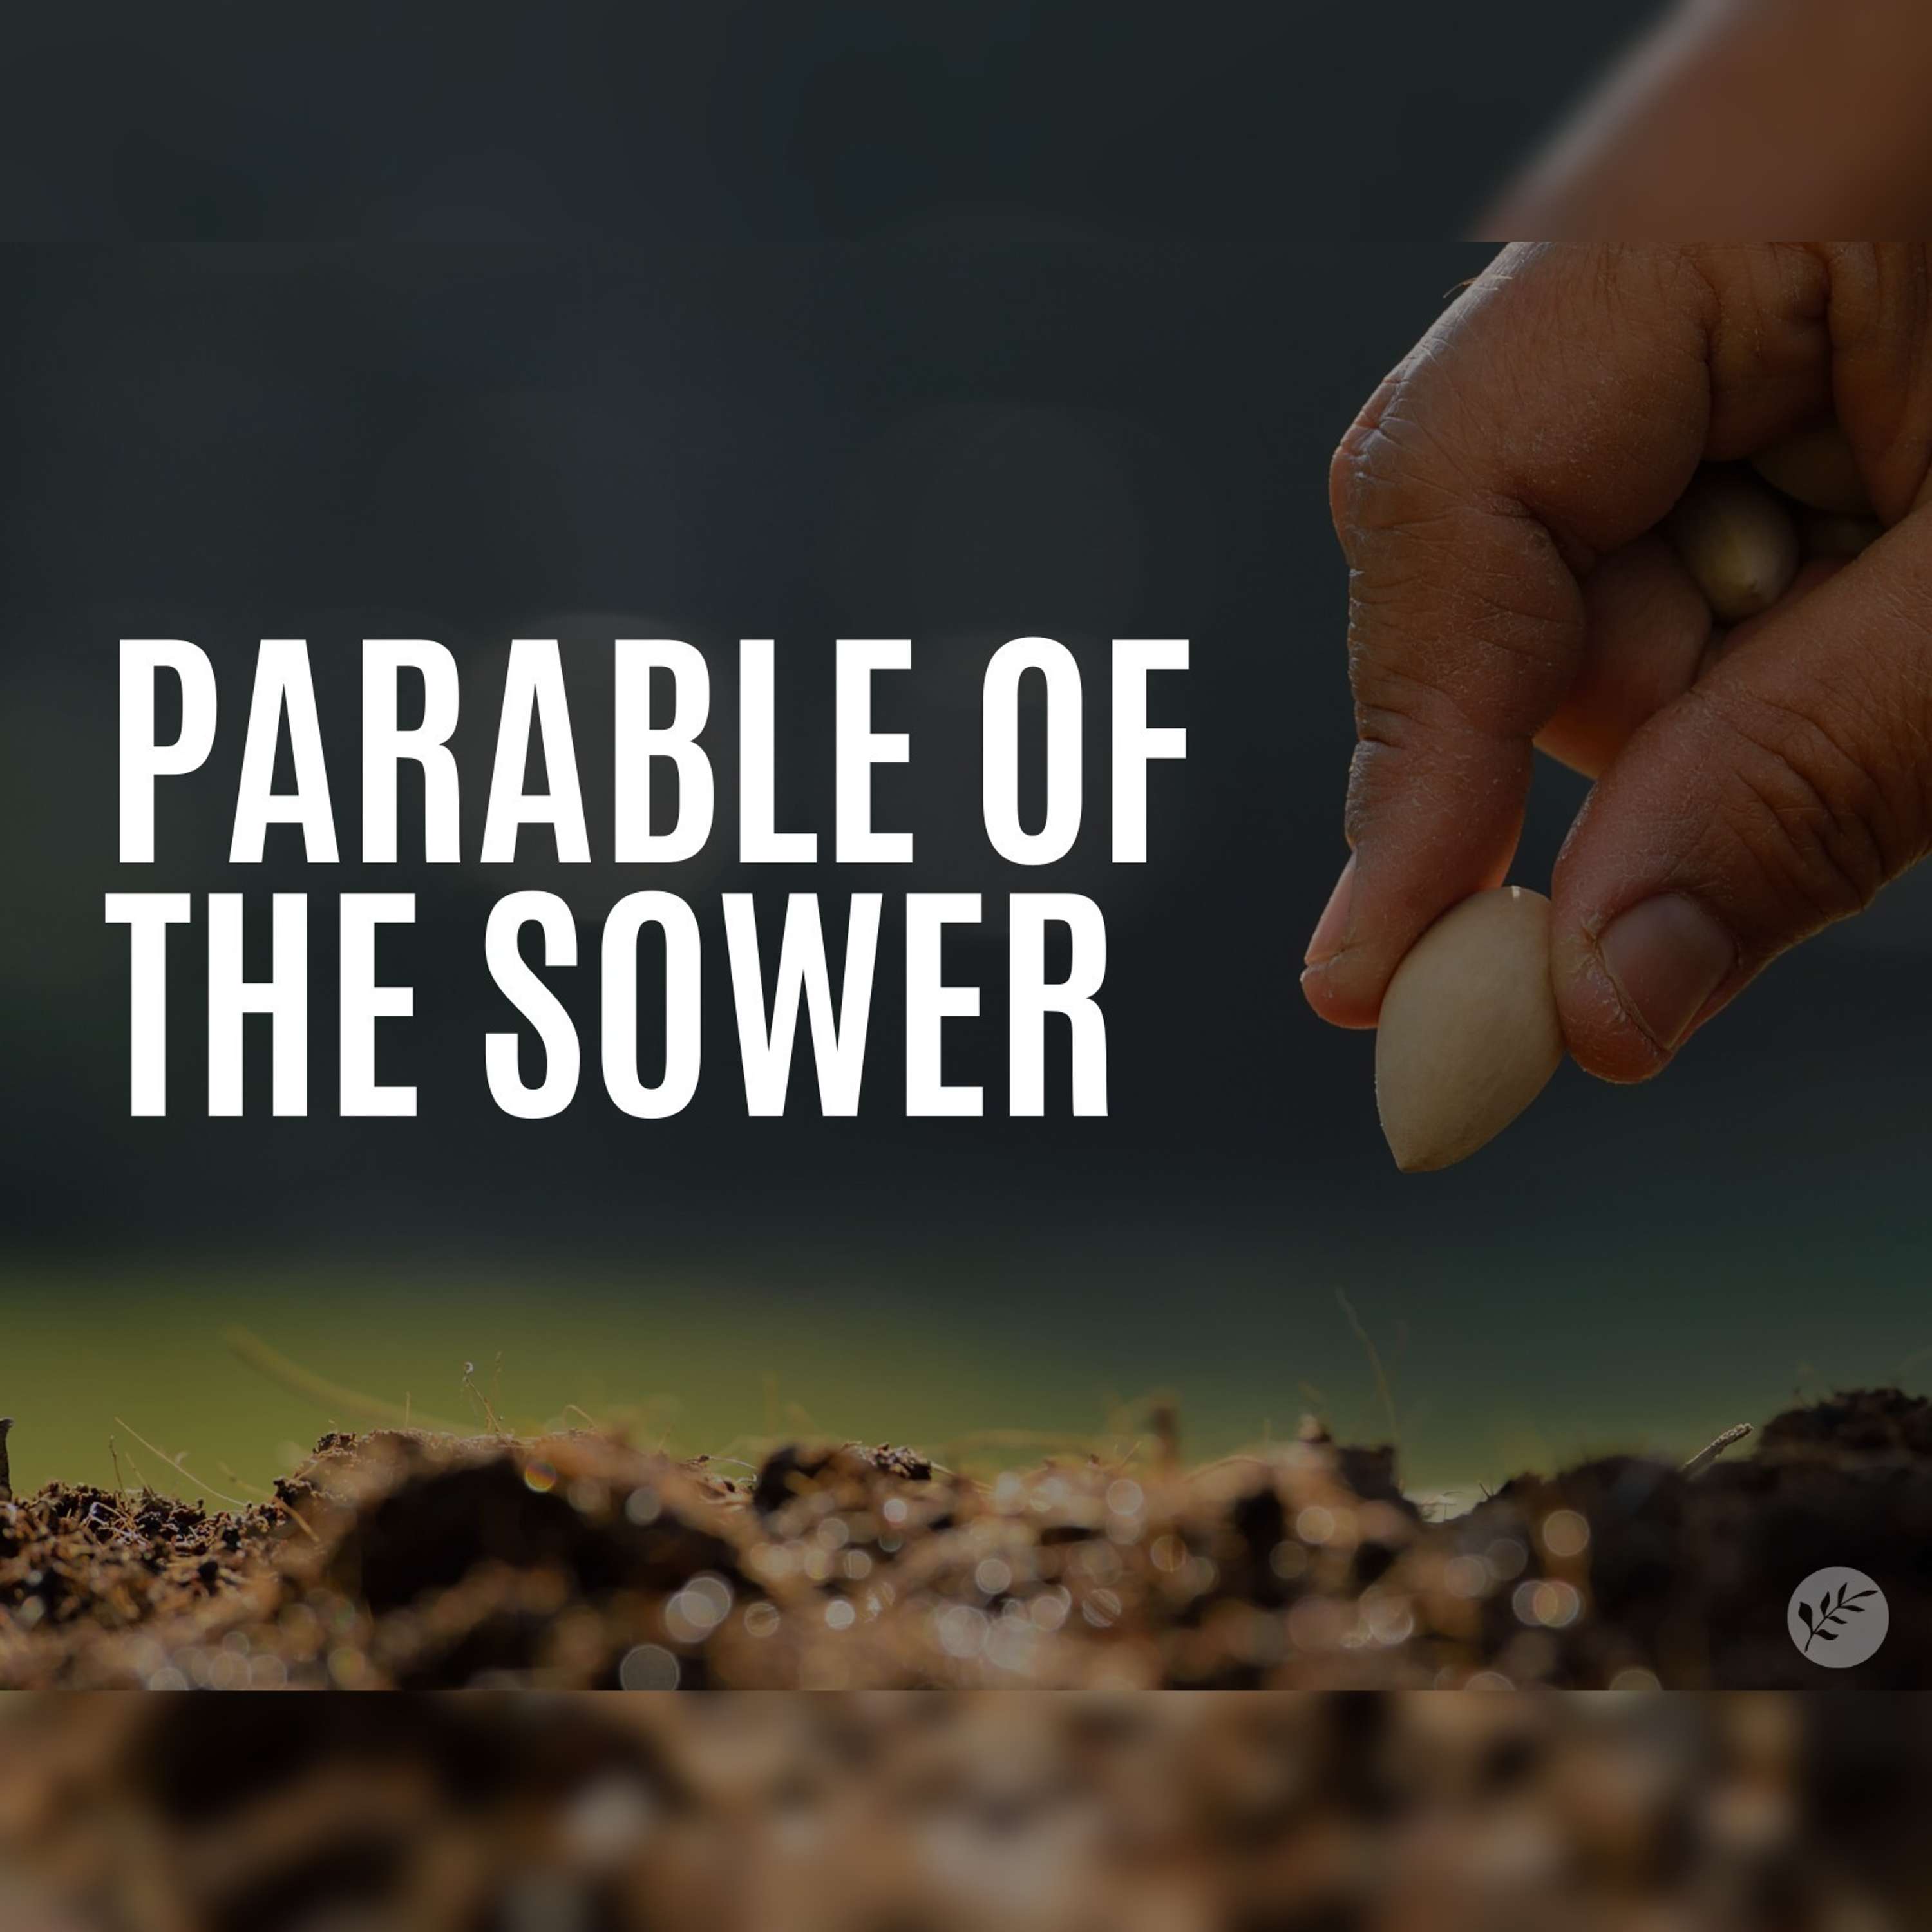 The Parable of the Sower | Matthew 13:1-9